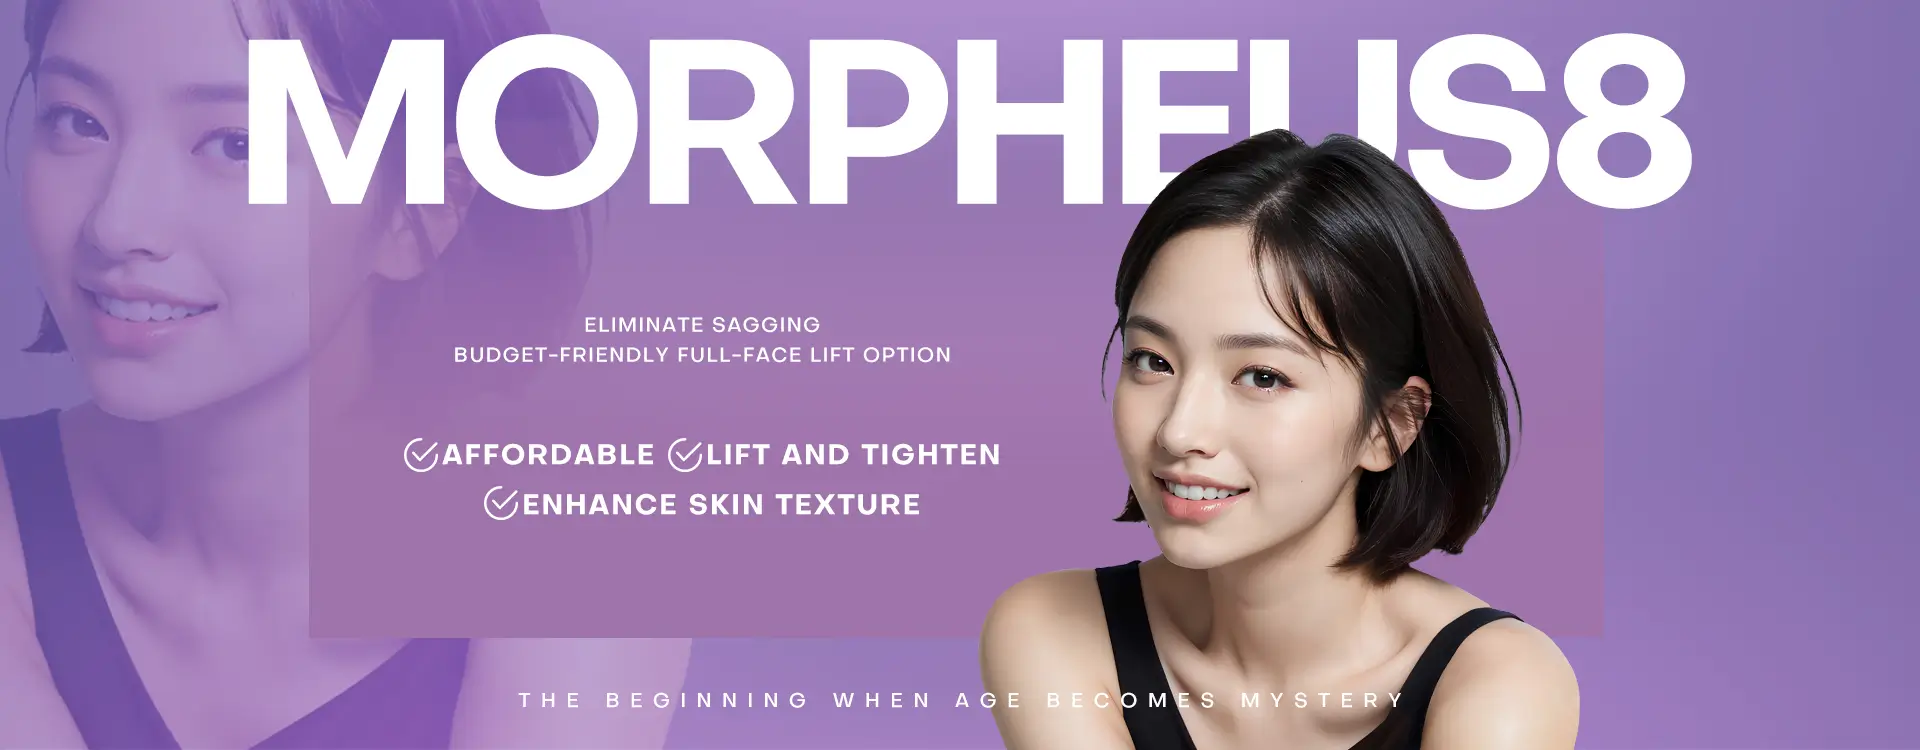 Morpheus8 Radiofrequency - Sagging OUT, Cost-effective Full-Face Lifting Option
